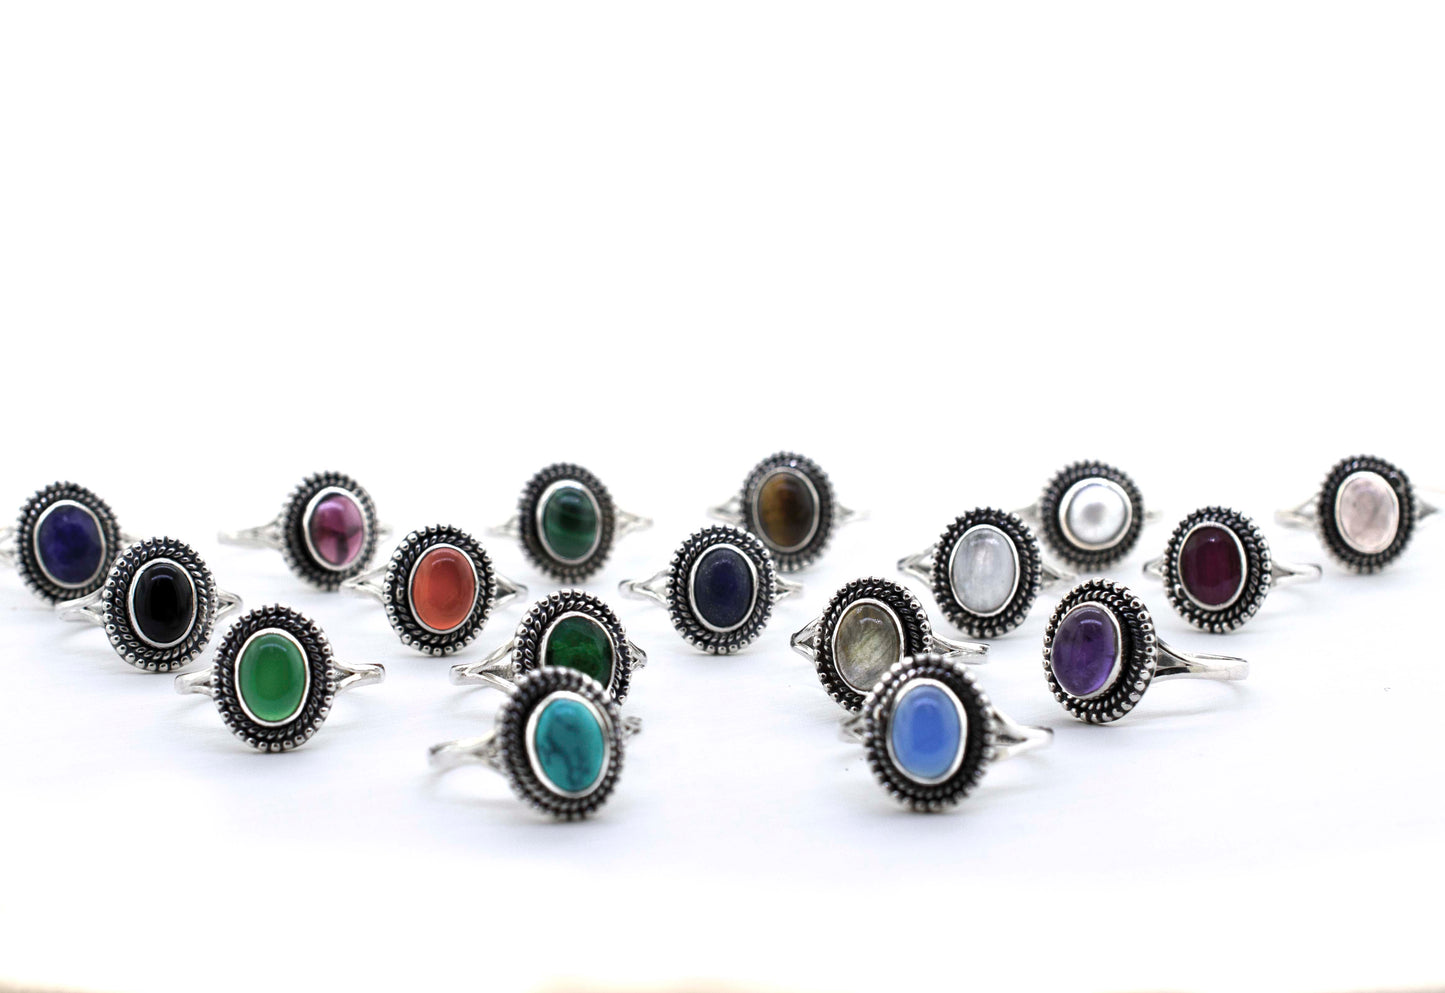 A group of colorful Gemstone Oval Shield Rings on a white background.